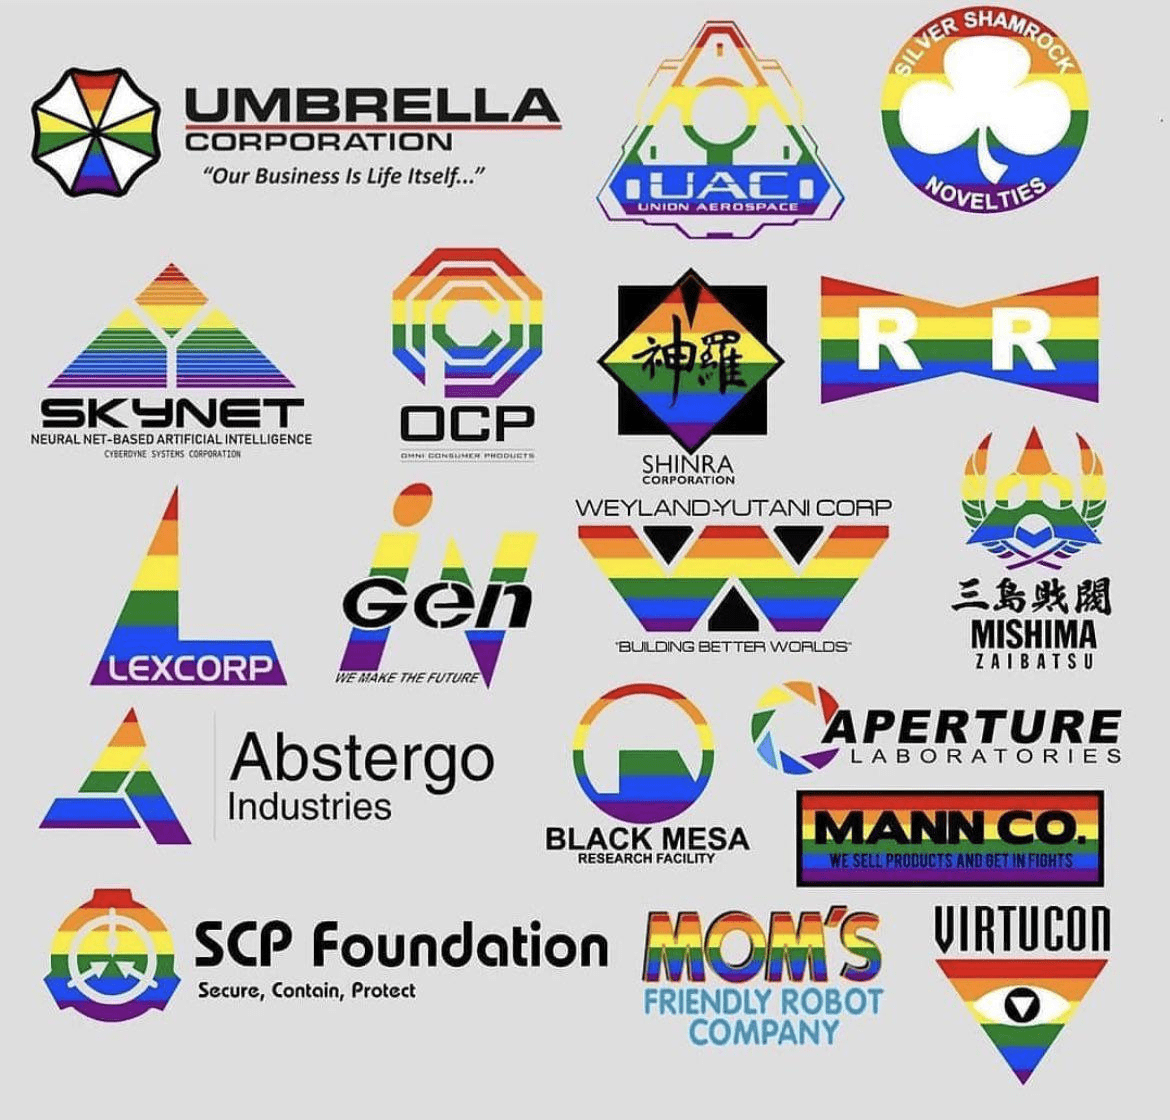 Video game and movie evil corporation logos in Pride rainbow colors